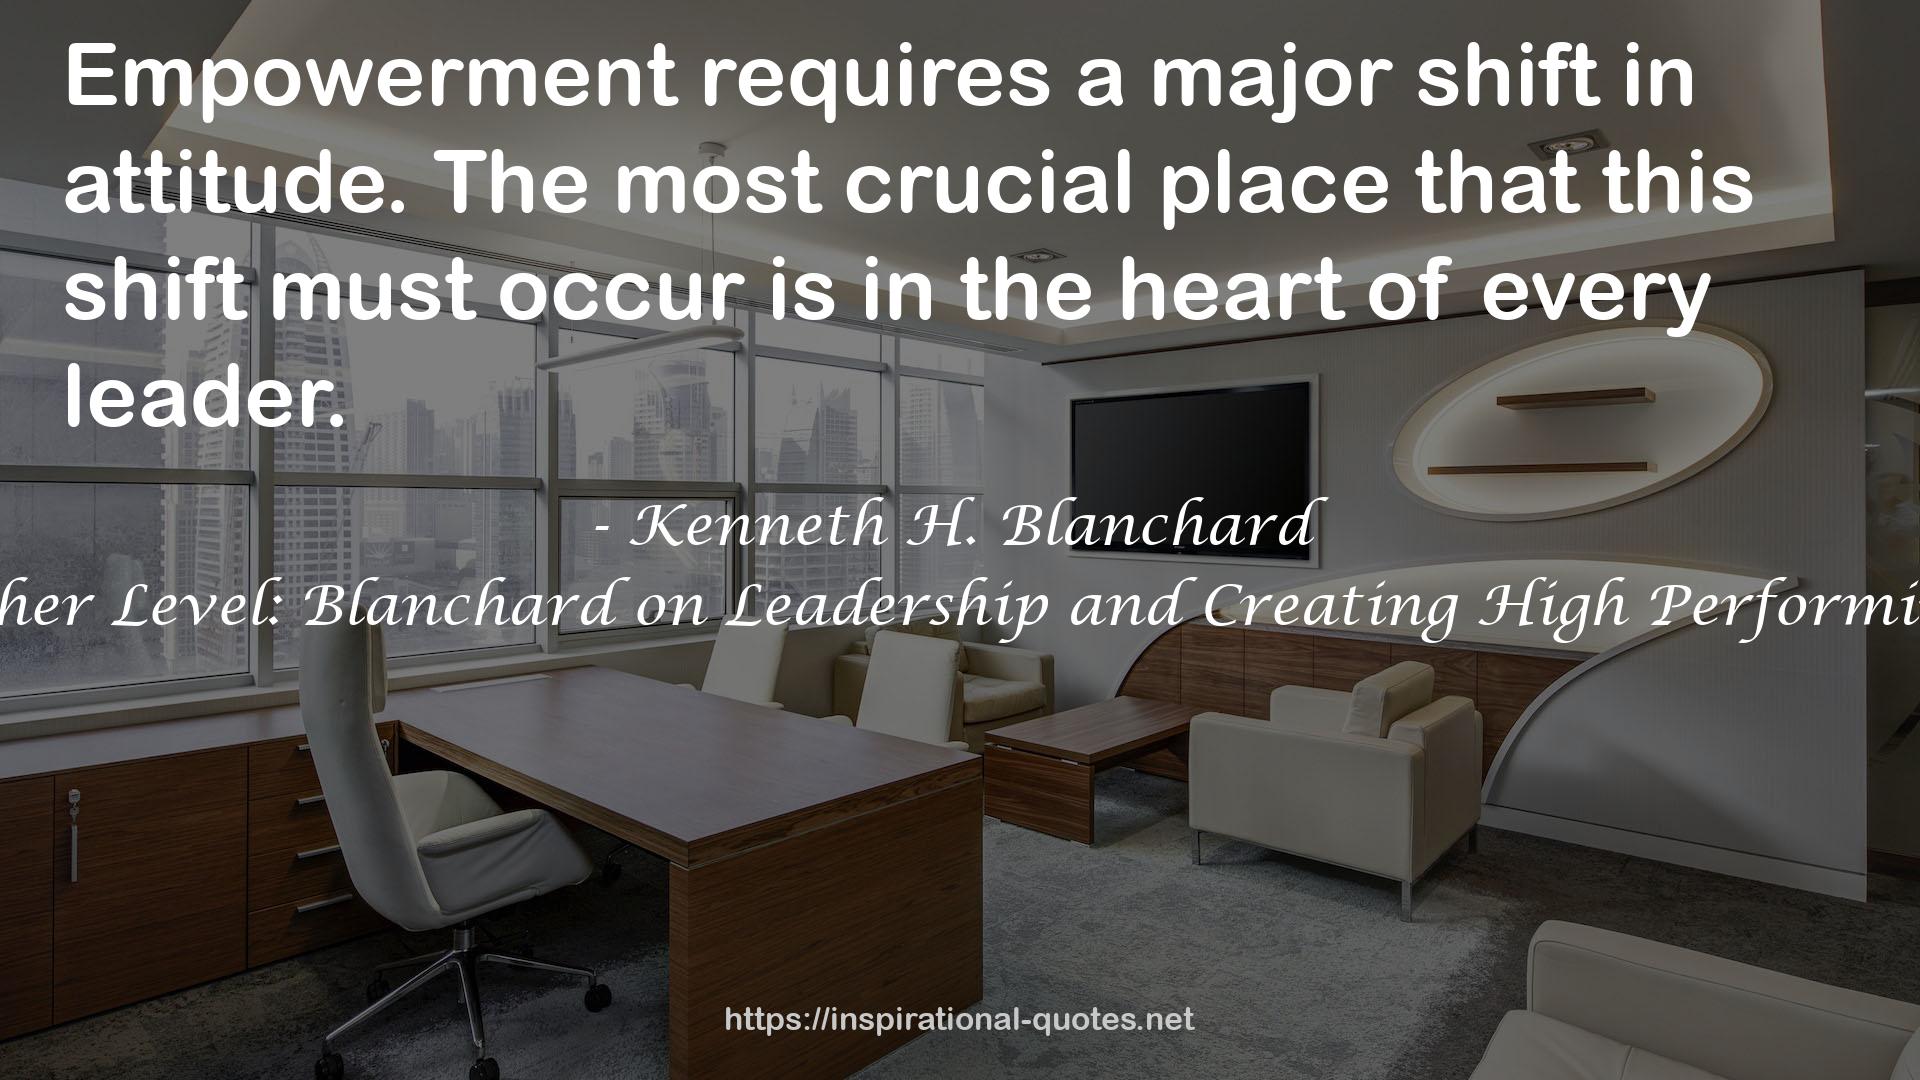 Leading at a Higher Level: Blanchard on Leadership and Creating High Performing Organizations QUOTES